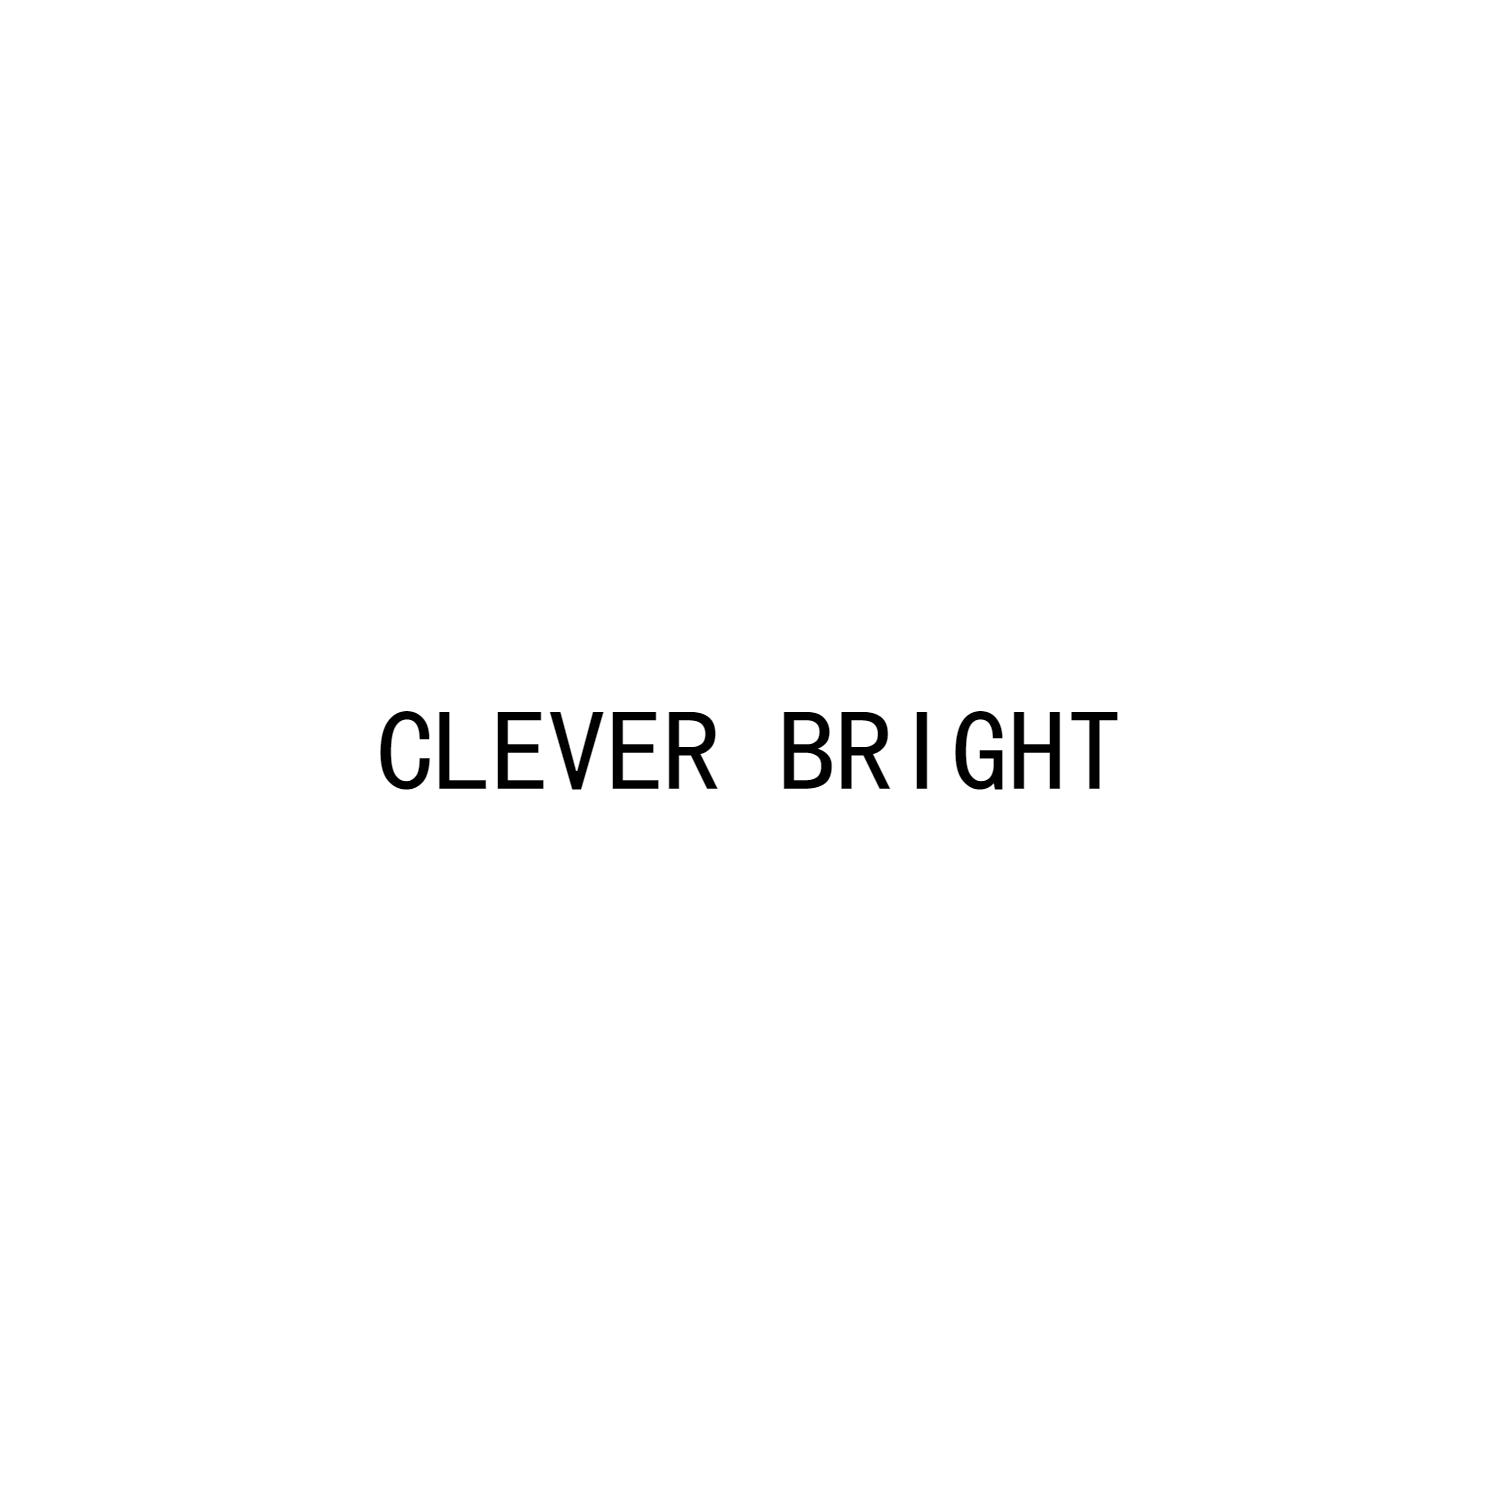 CLEVER BRIGHT